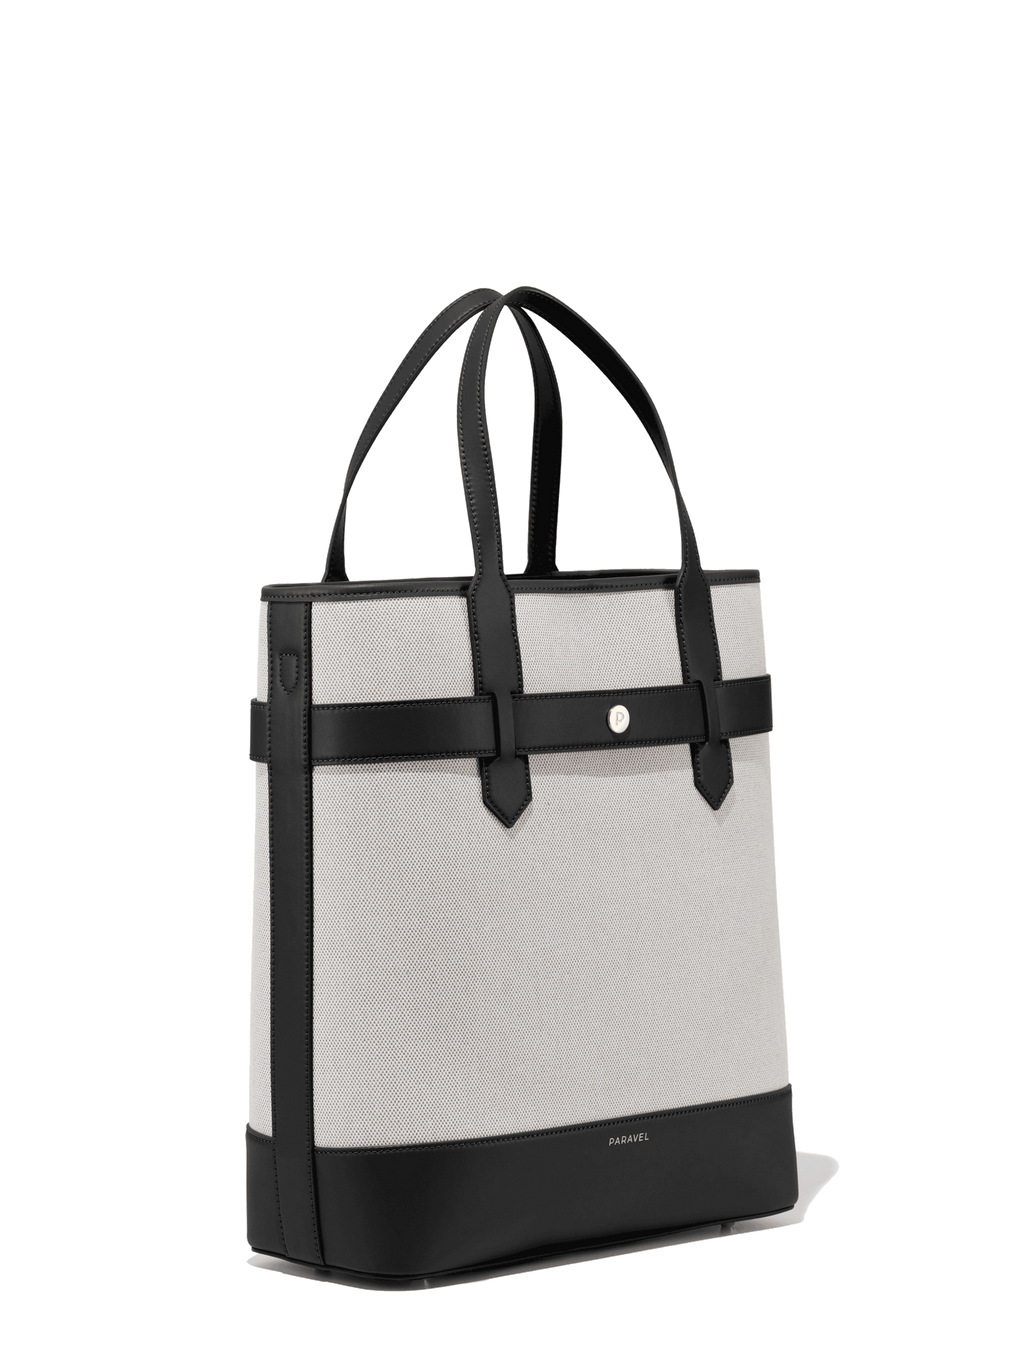 Burberry Society Tote Bag Large White/Black in Cotton - US